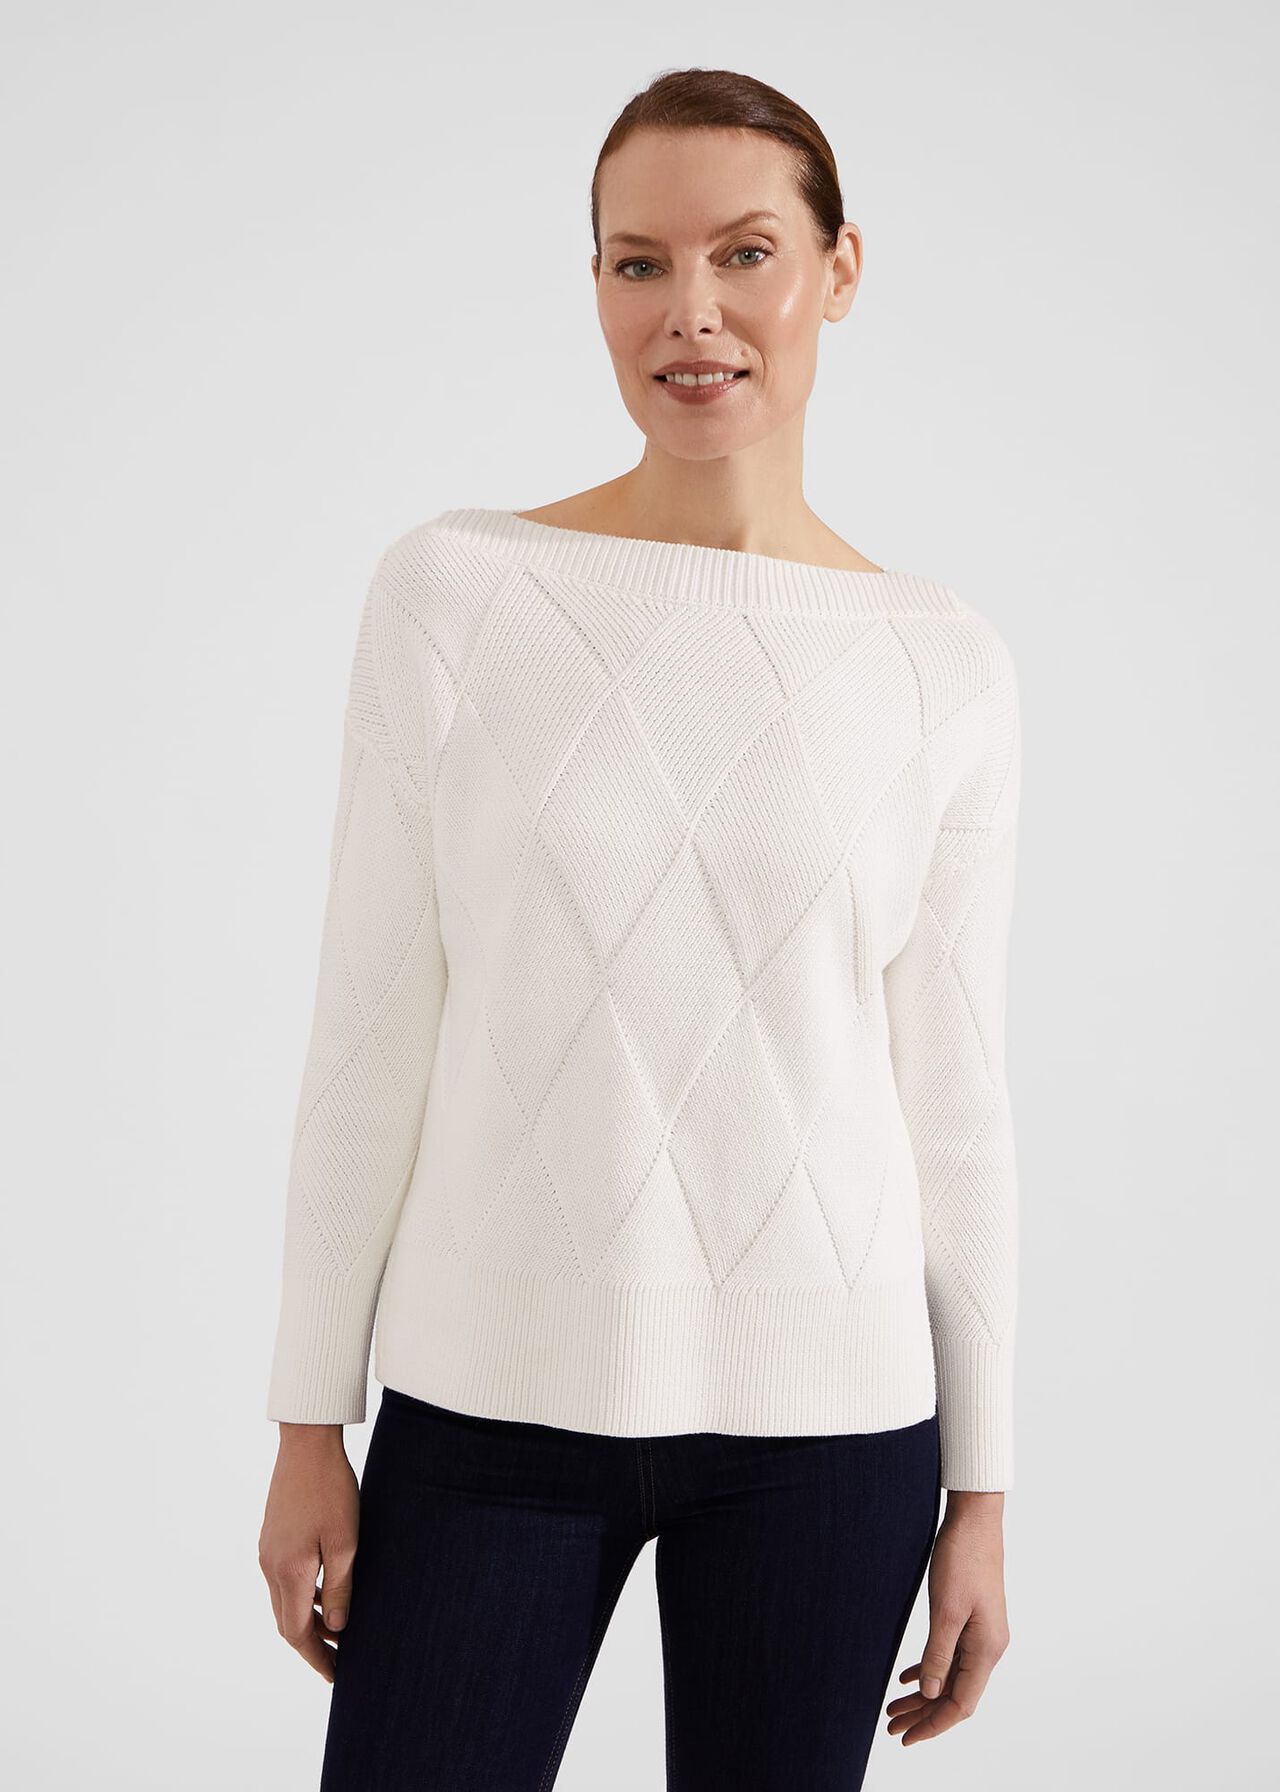 Emmy Cotton Sweater, Ivory, hi-res